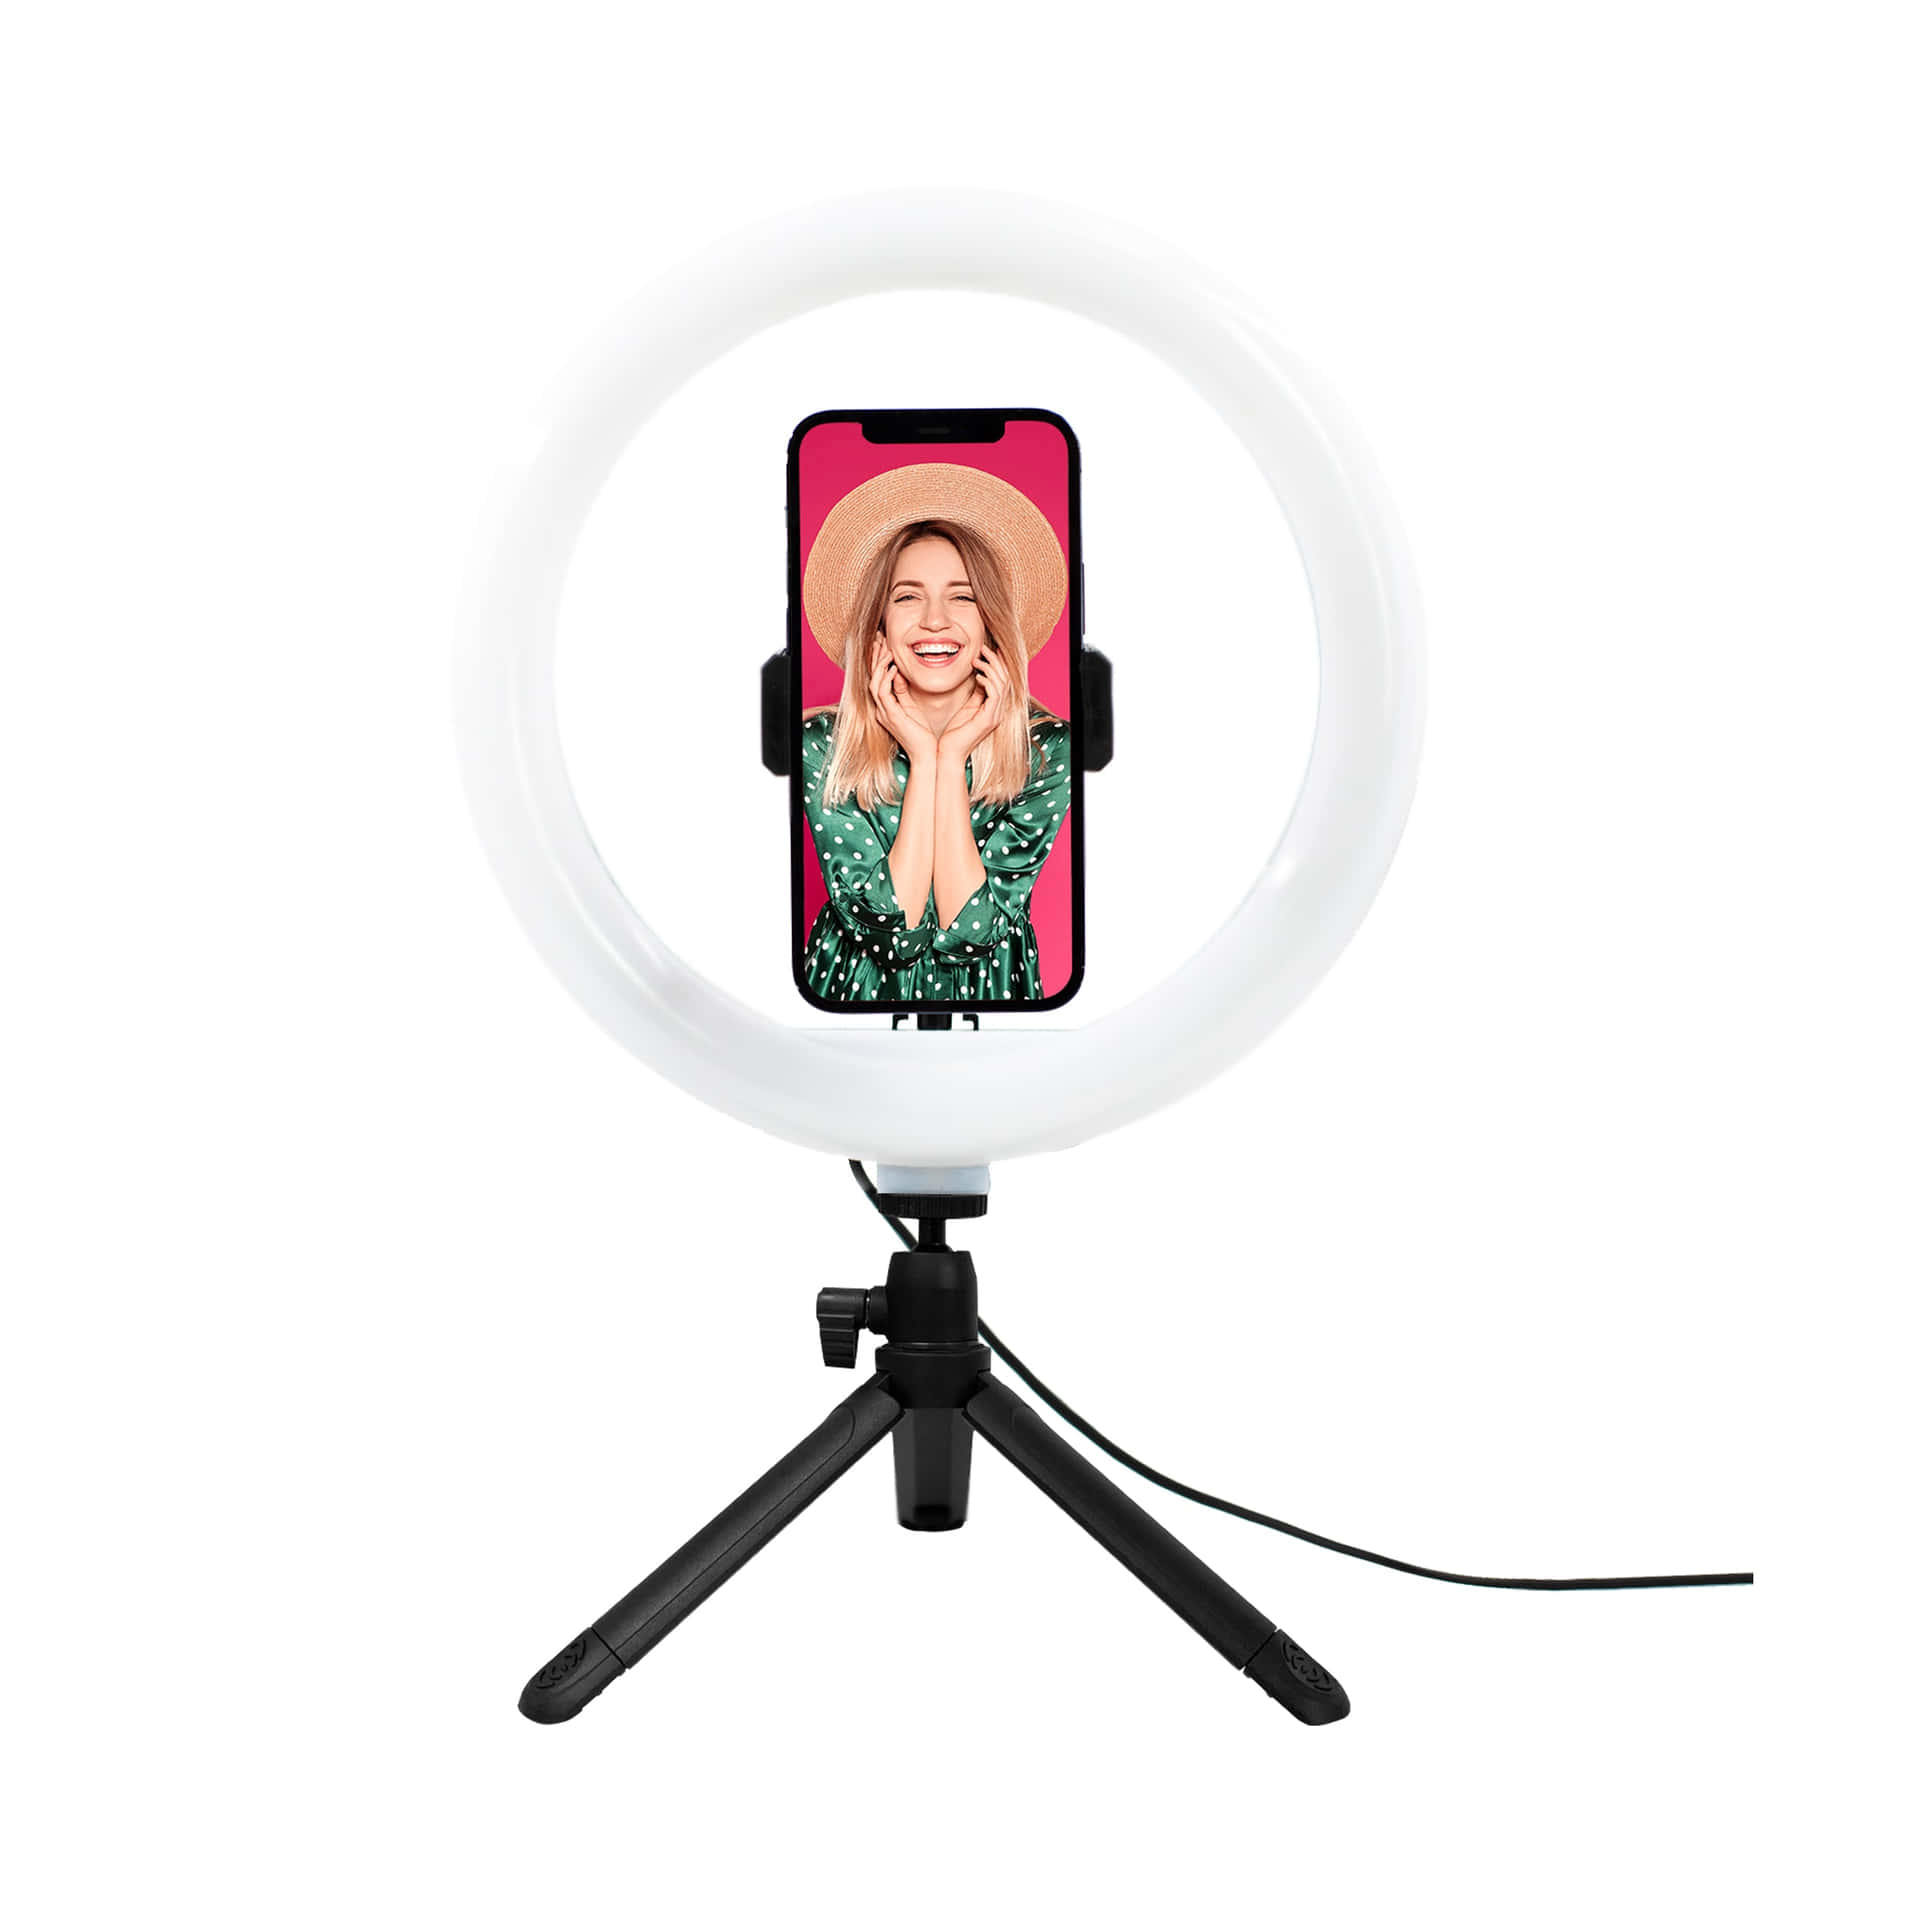 Look your best in every photo with a quality Ring Light